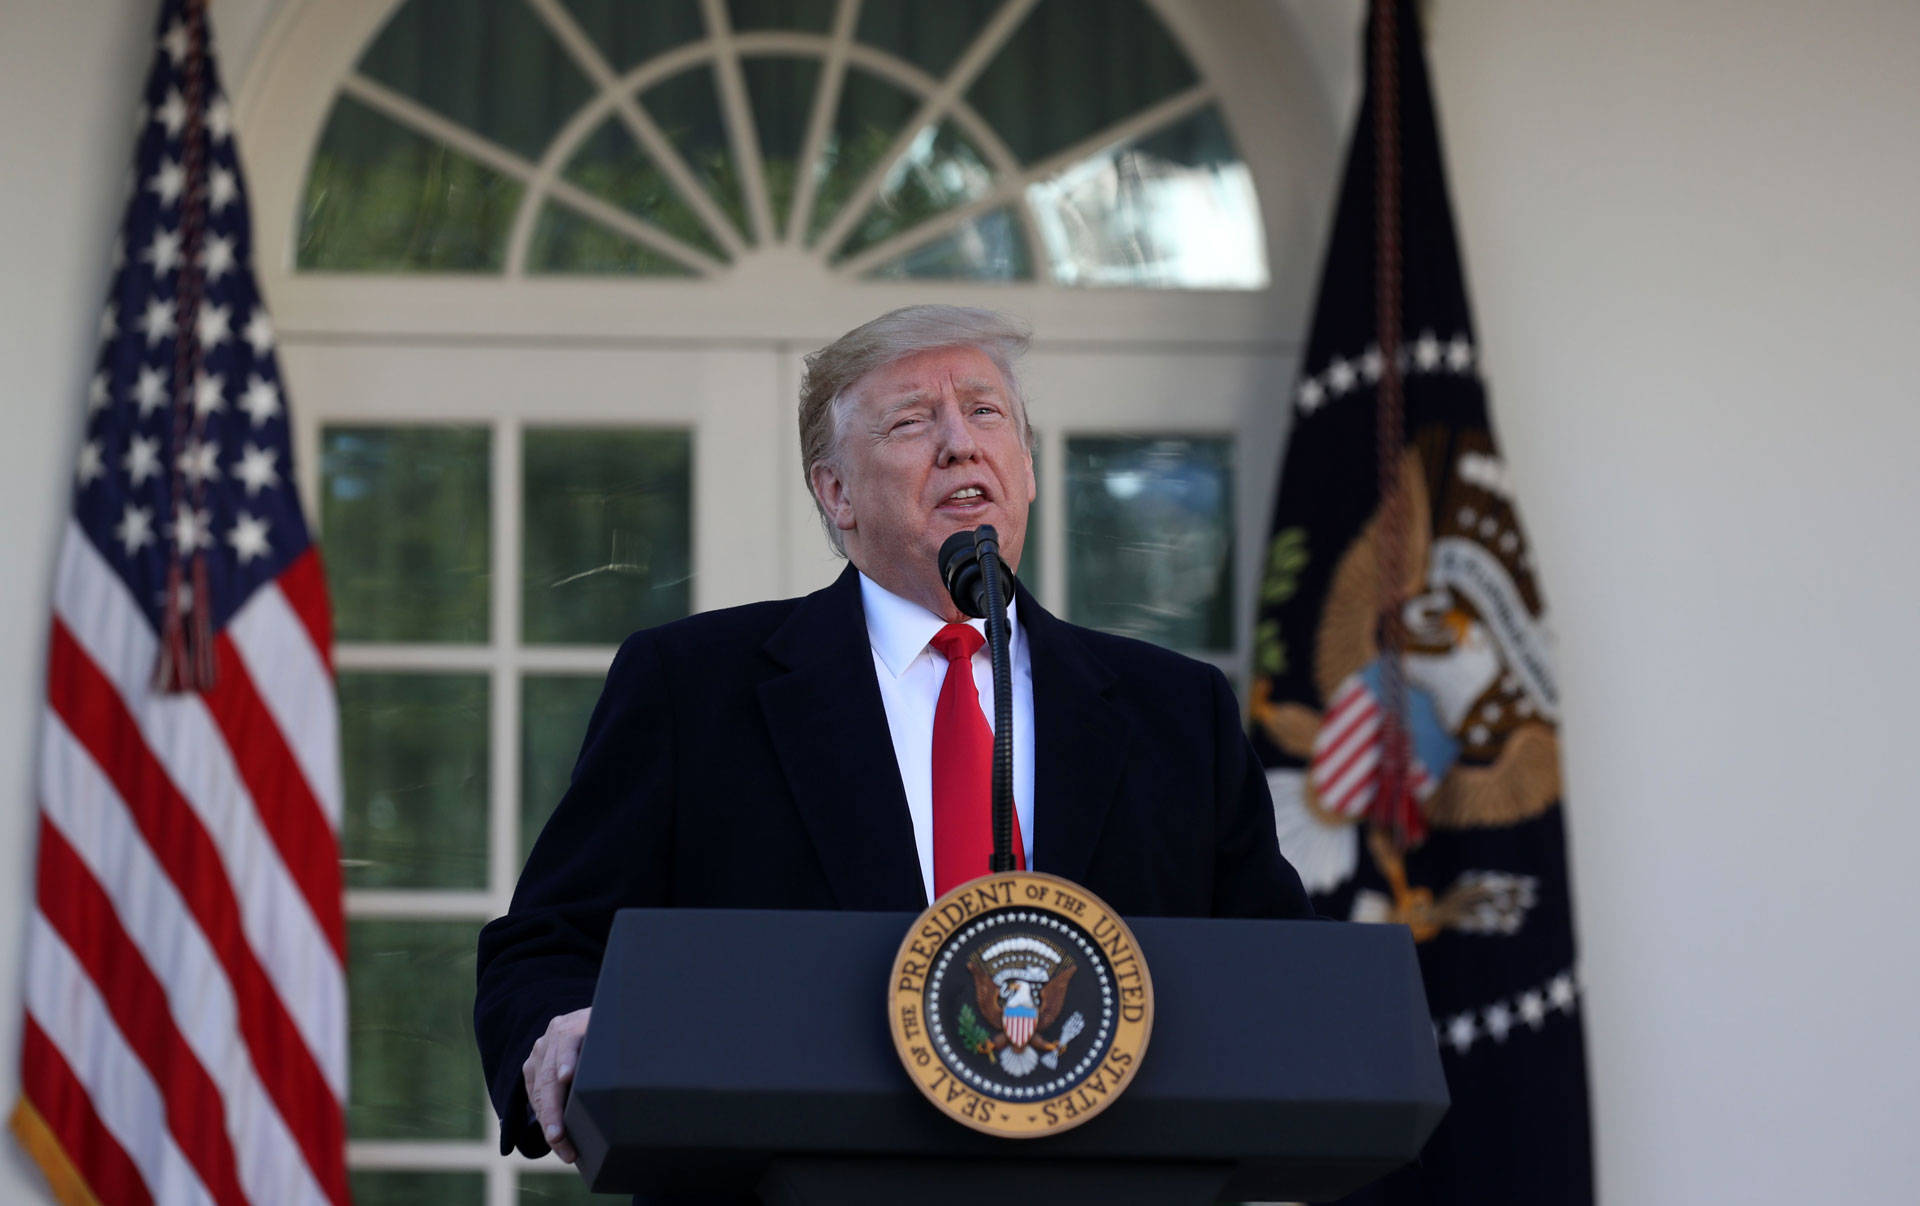 President Donald Trump speaks about the government shutdown on January 25, 2019, from the Rose Garden of the White House. ALEX EDELMAN/AFP/Getty Images